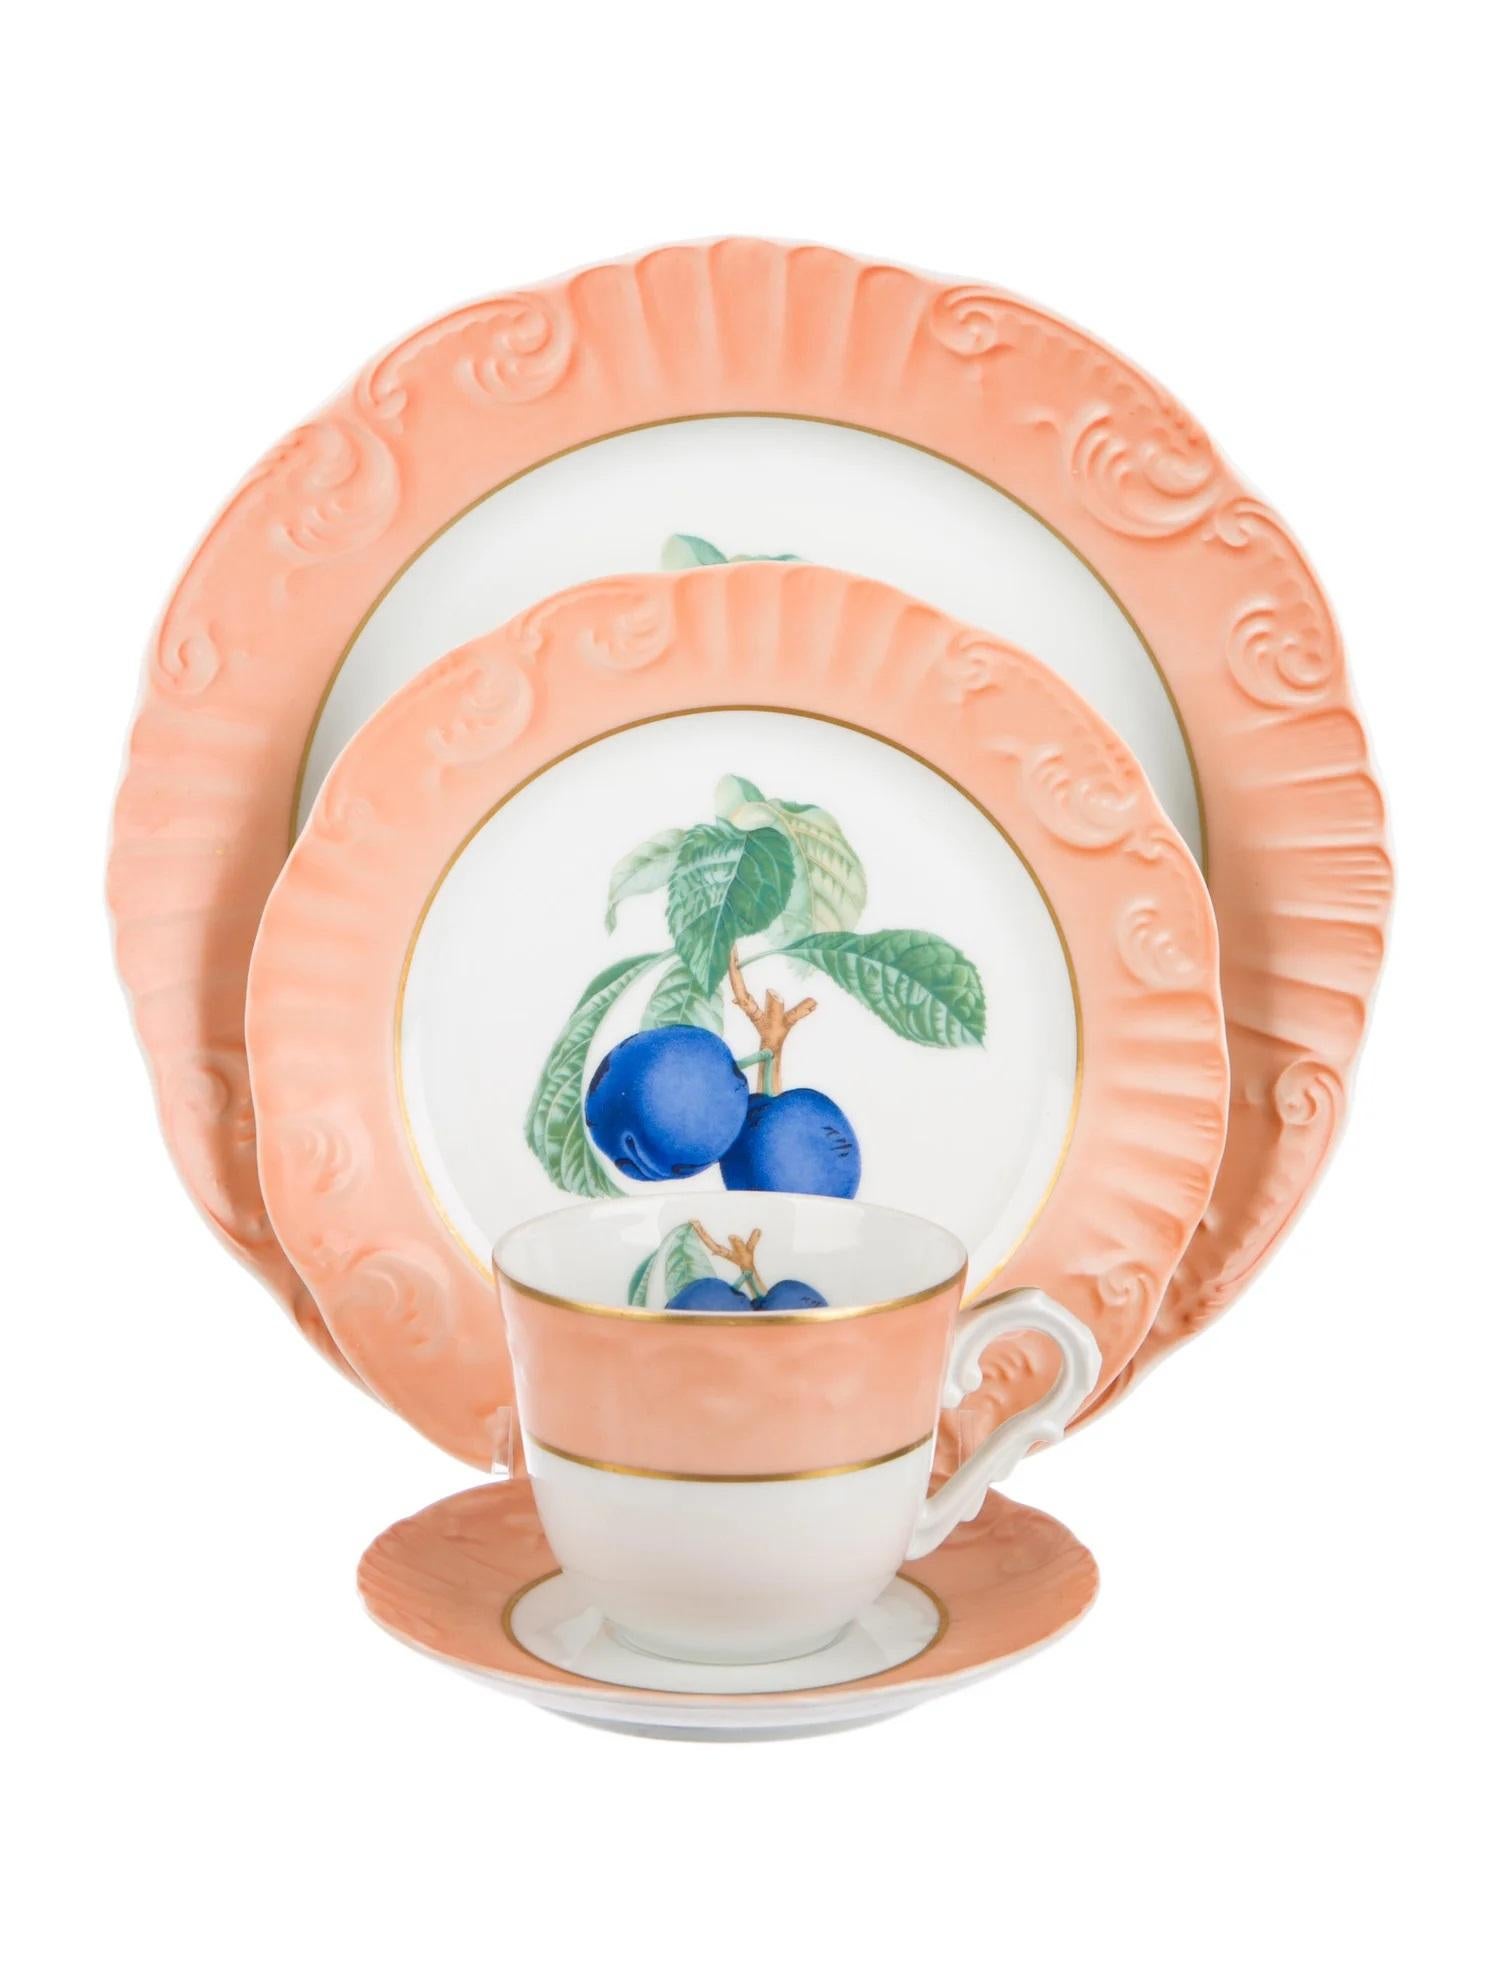 Country Mottahedeh Summer Fruit Dinnerware Set, 24 Pieces